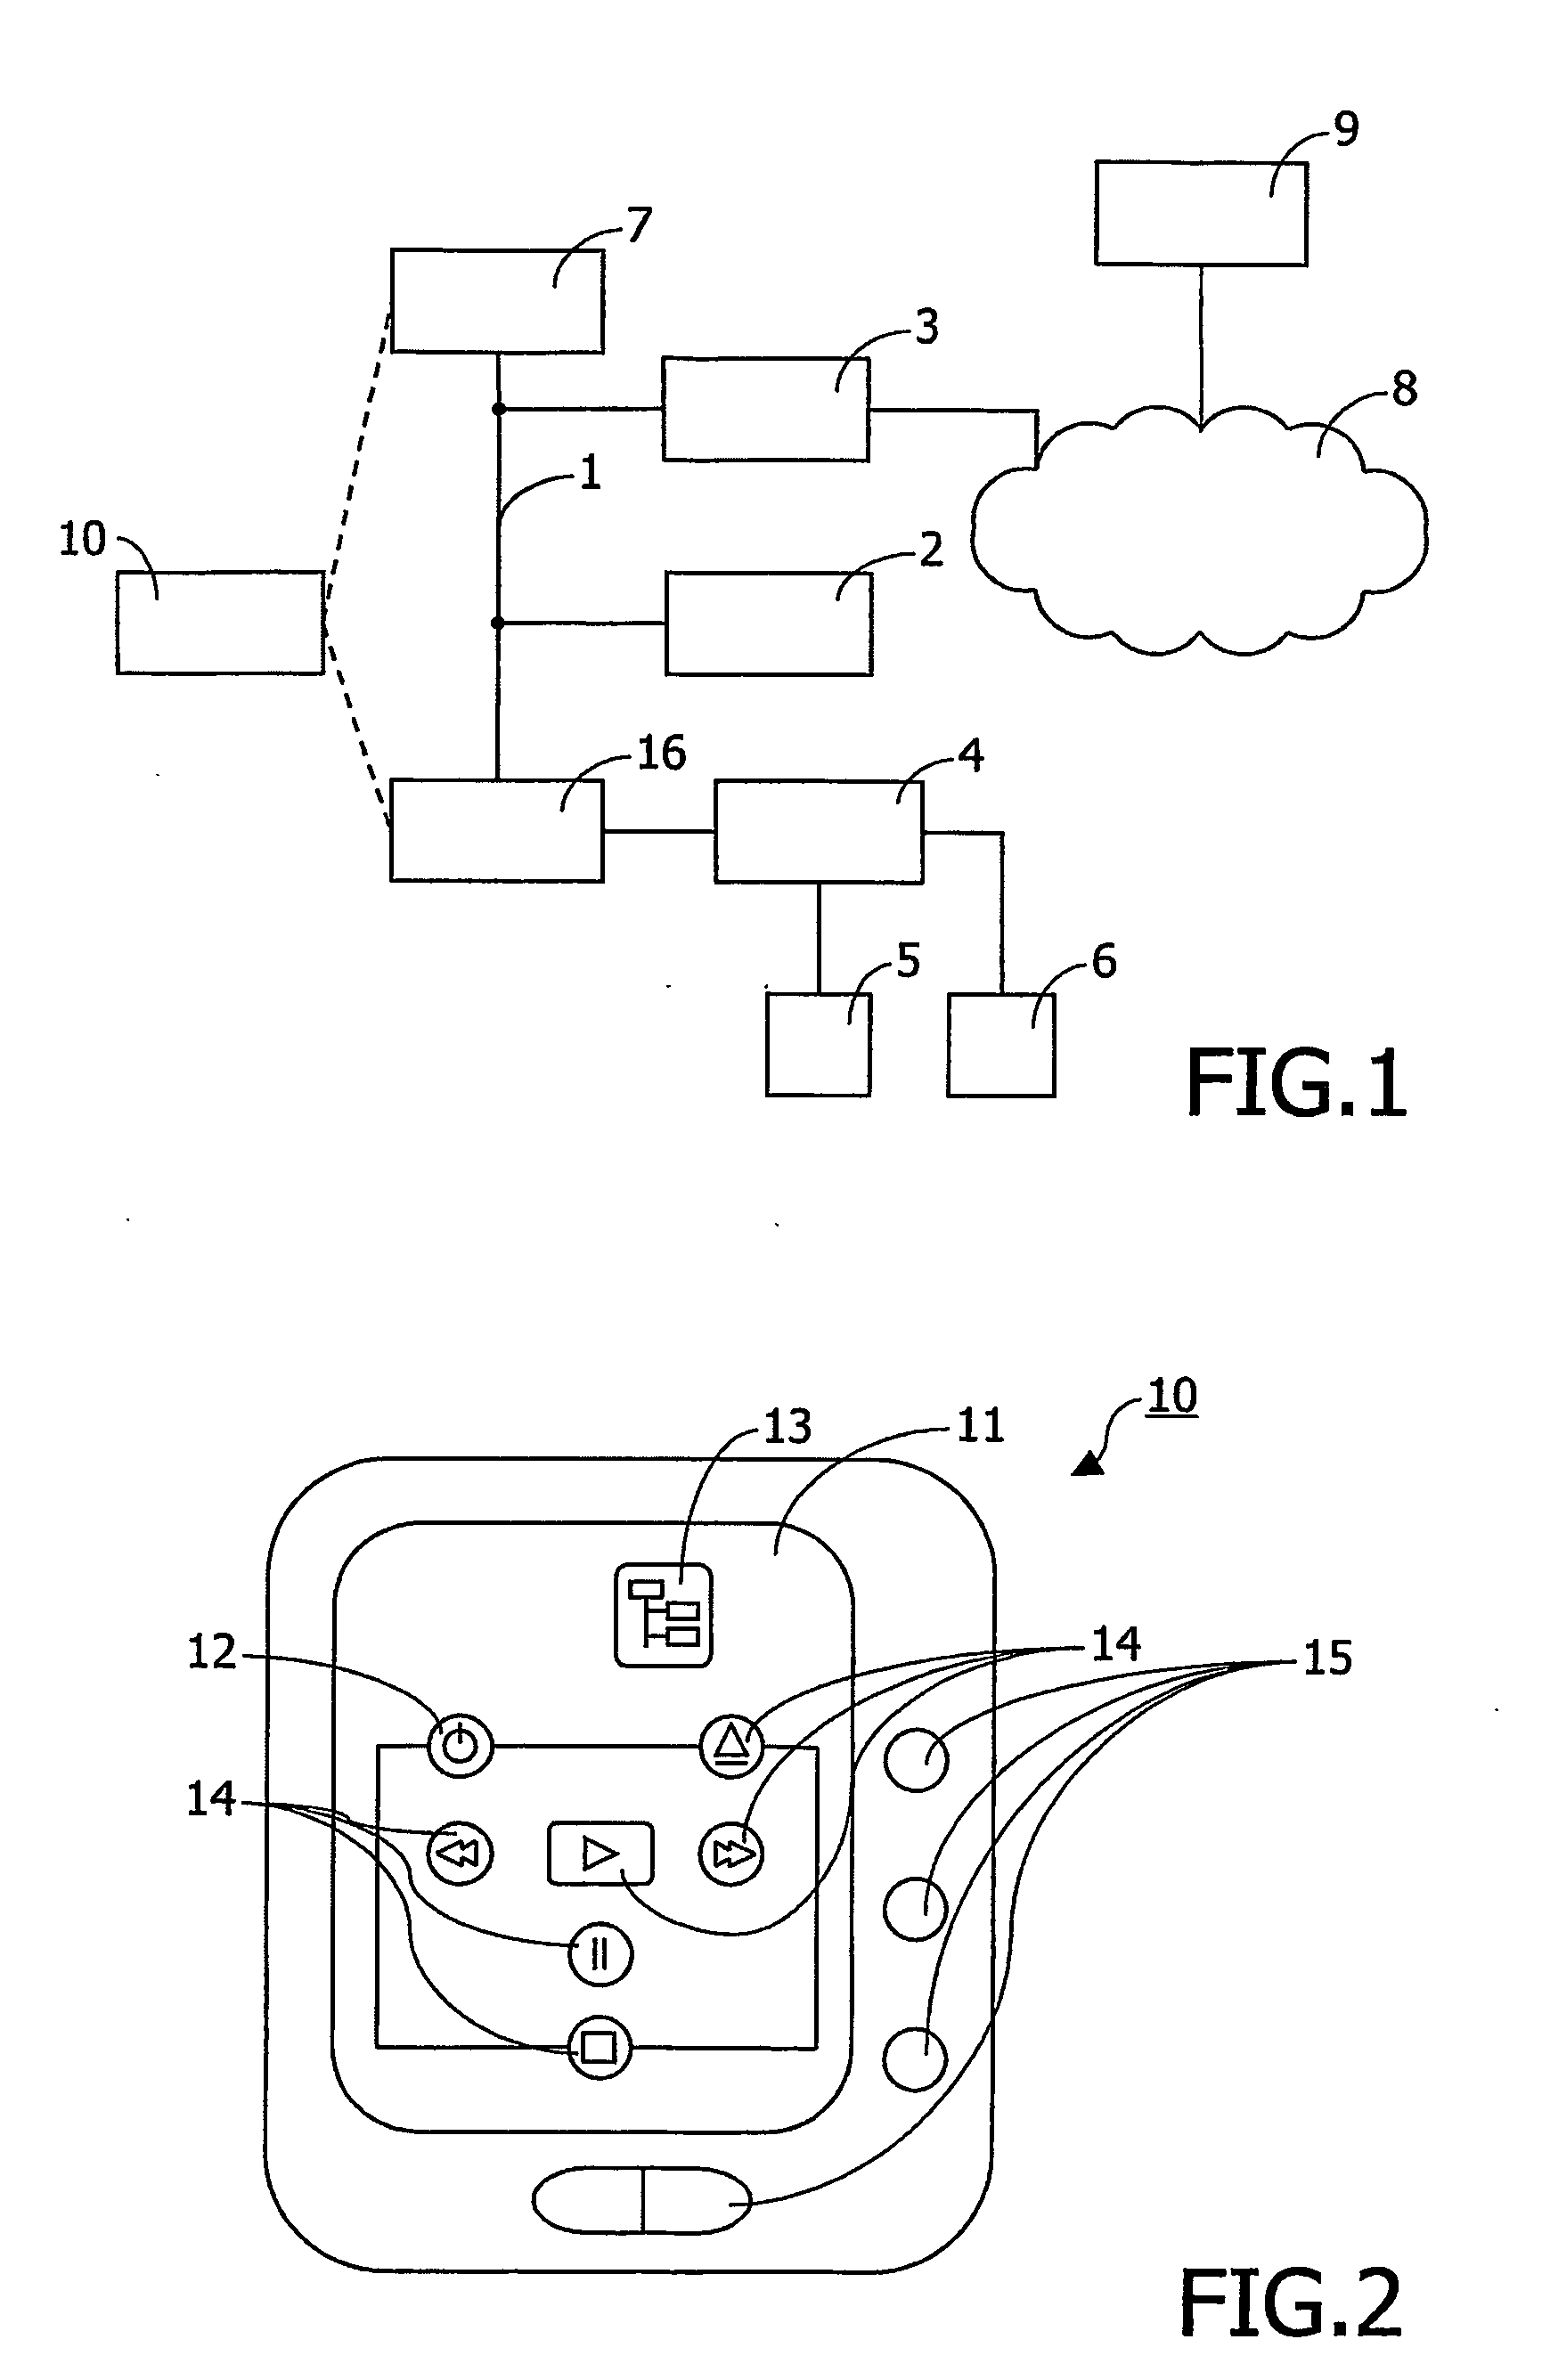 Method of enabling the programming of a universal remote control system